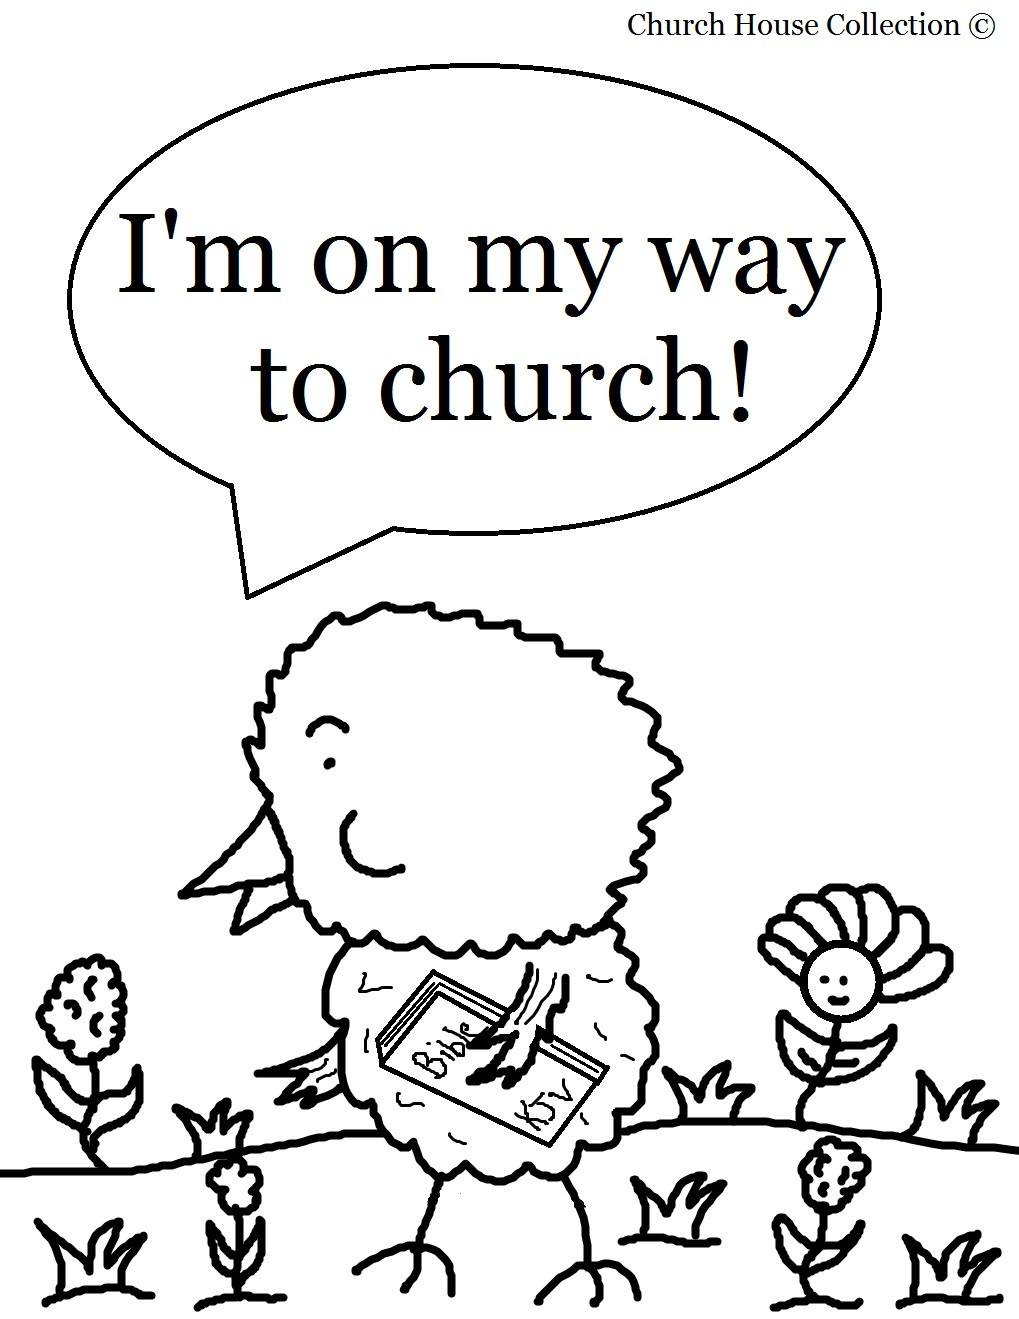 Kids Church Coloring Pages
 Church House Collection Blog Easter Chick Coloring Page